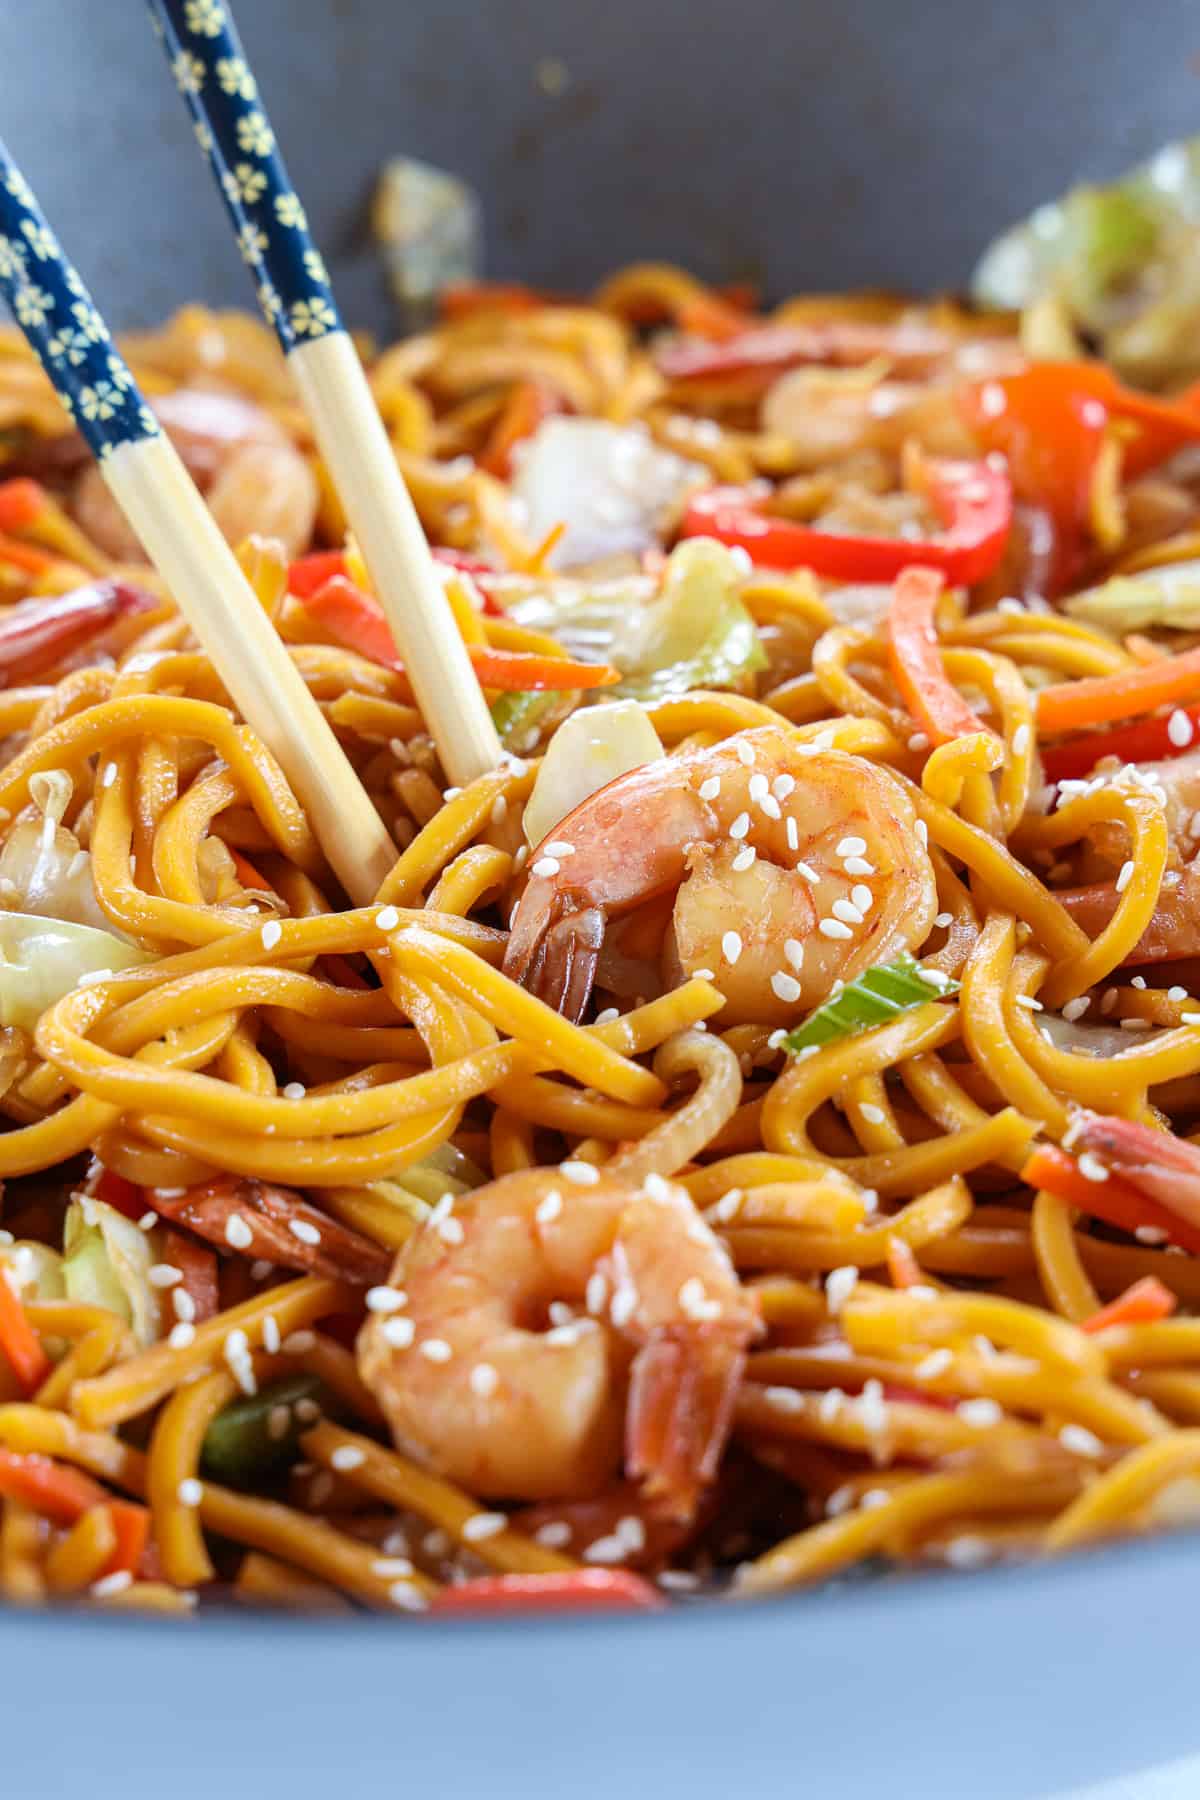 https://simplyhomecooked.com/wp-content/uploads/2020/10/Shrimp-chow-mein-52.jpg